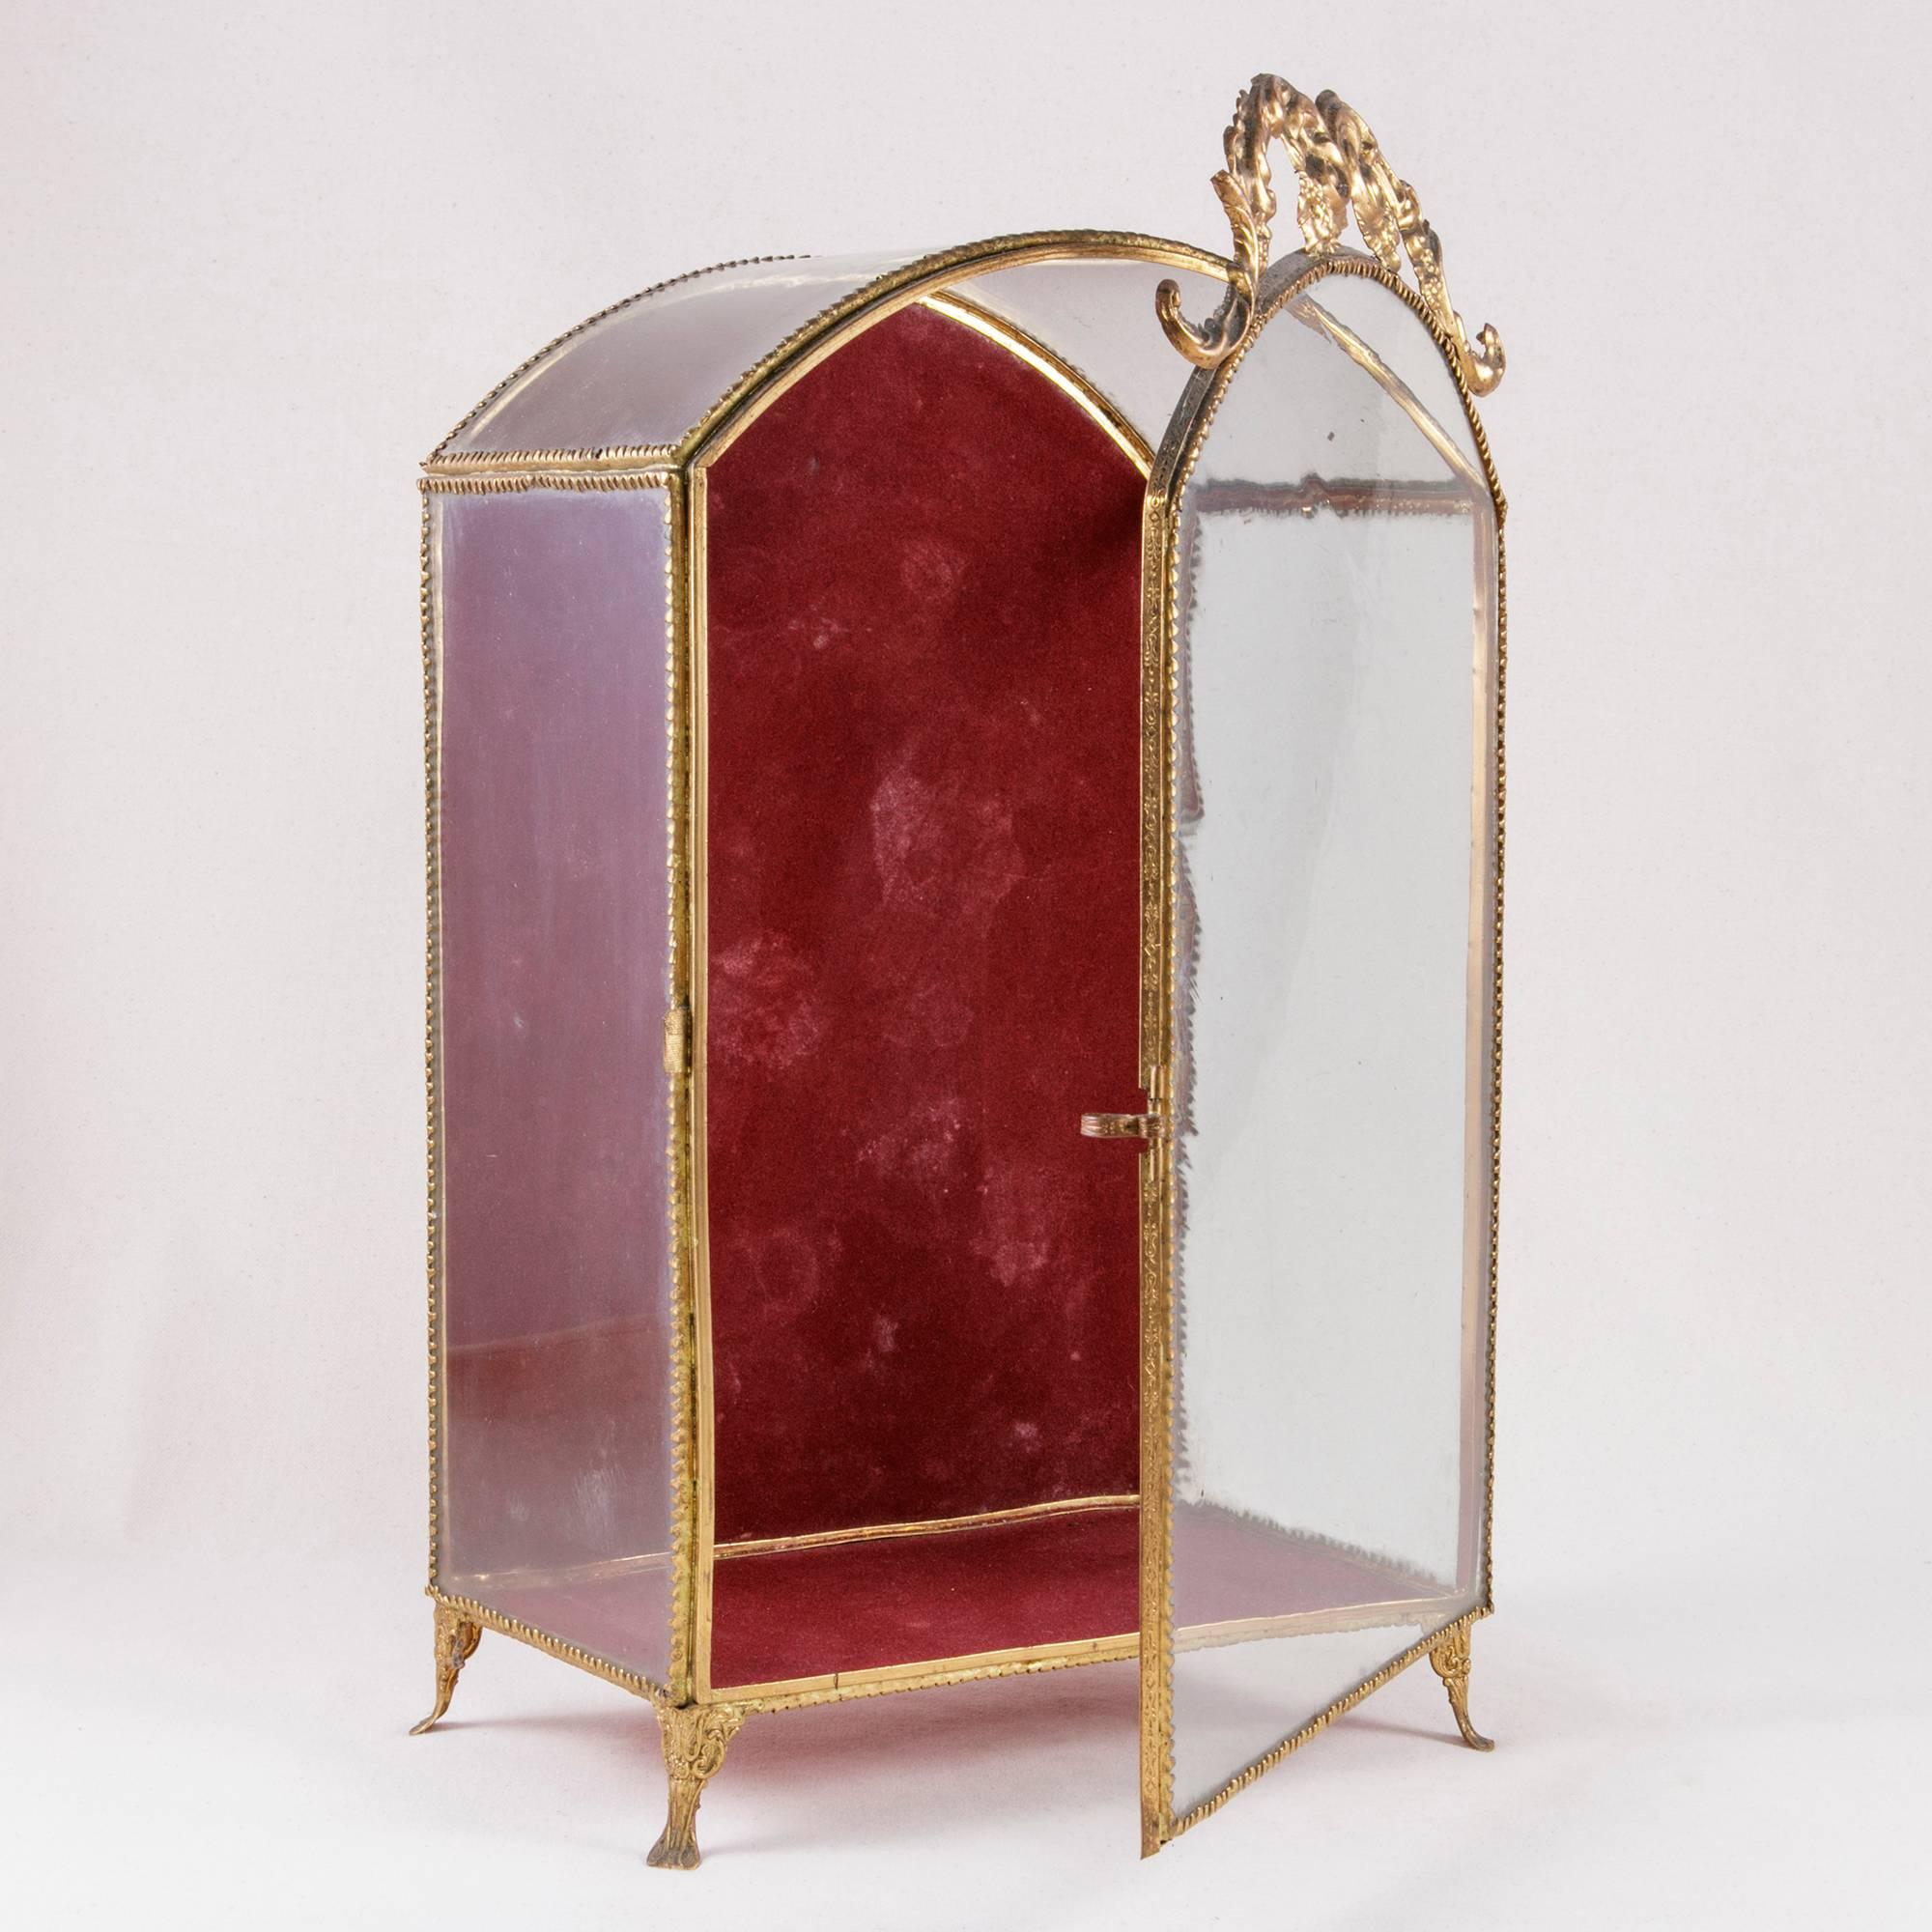 This late 19th century brass tabletop vitrine was originally used to display the floral garland headpiece worn by a French bride. It stands on detailed brass feet and features brass ormolu banding surrounding its original glass panes. The bonnet top